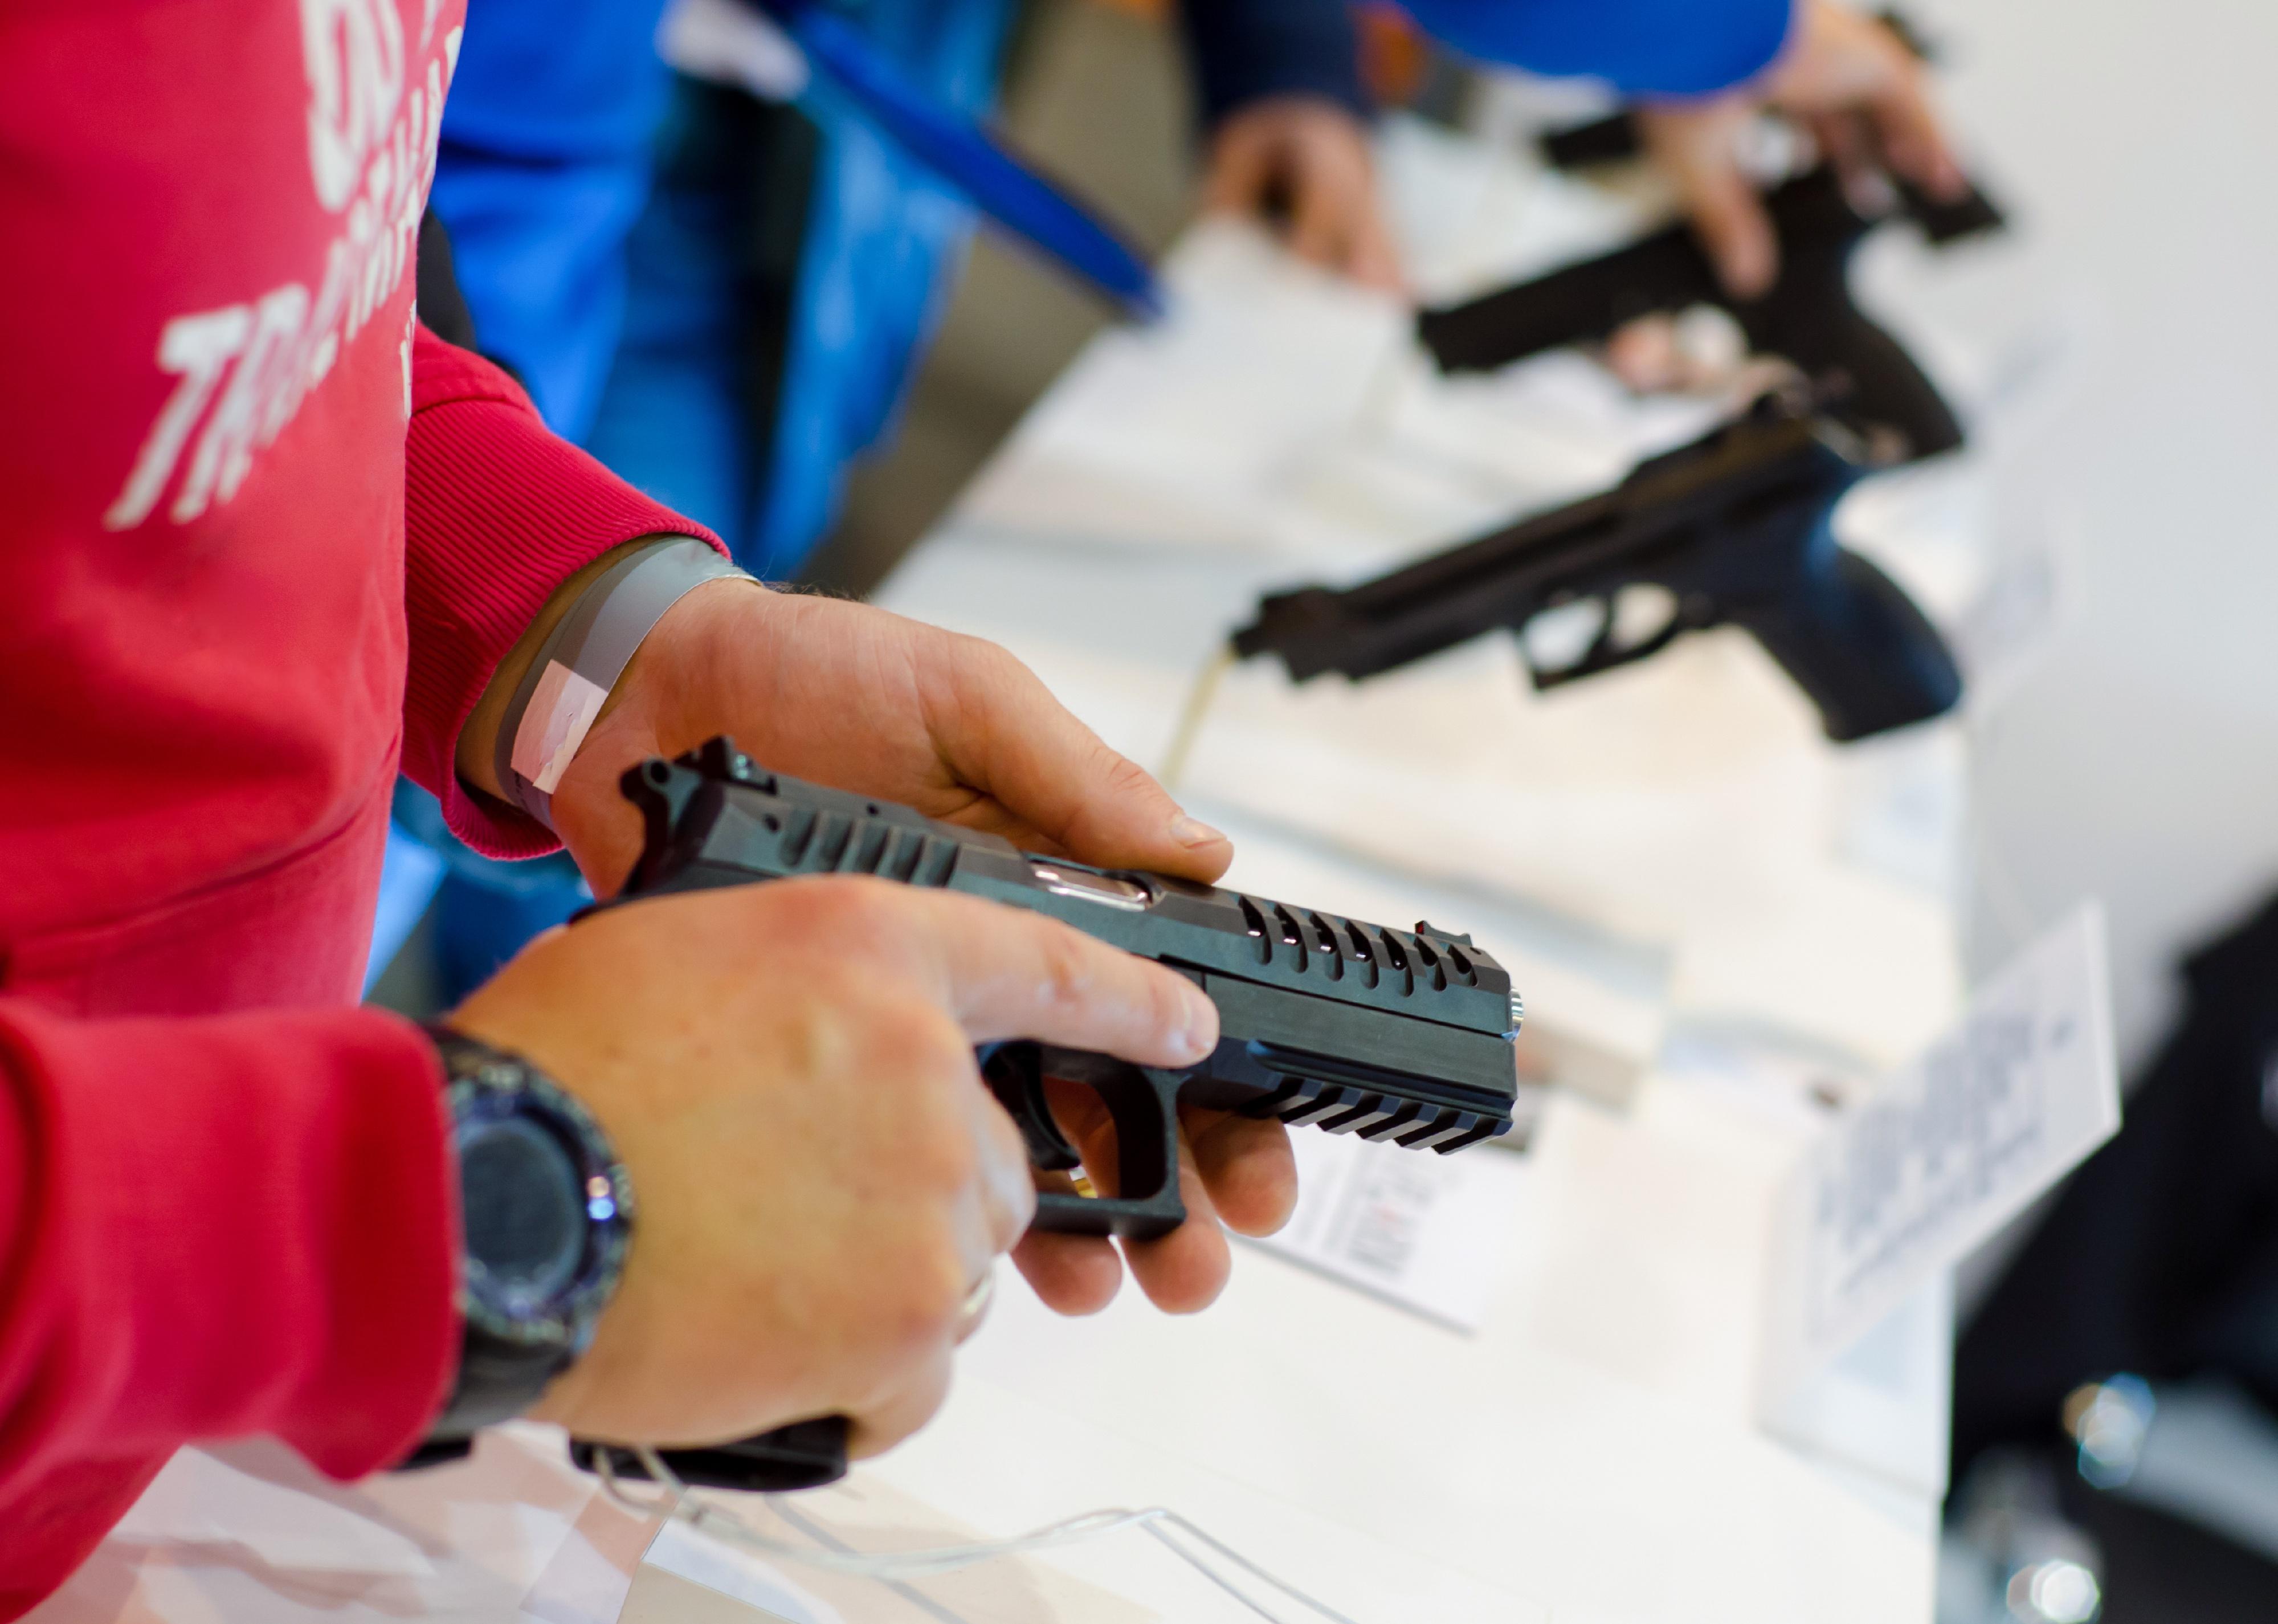 Close up of a person holding a gun in a store.